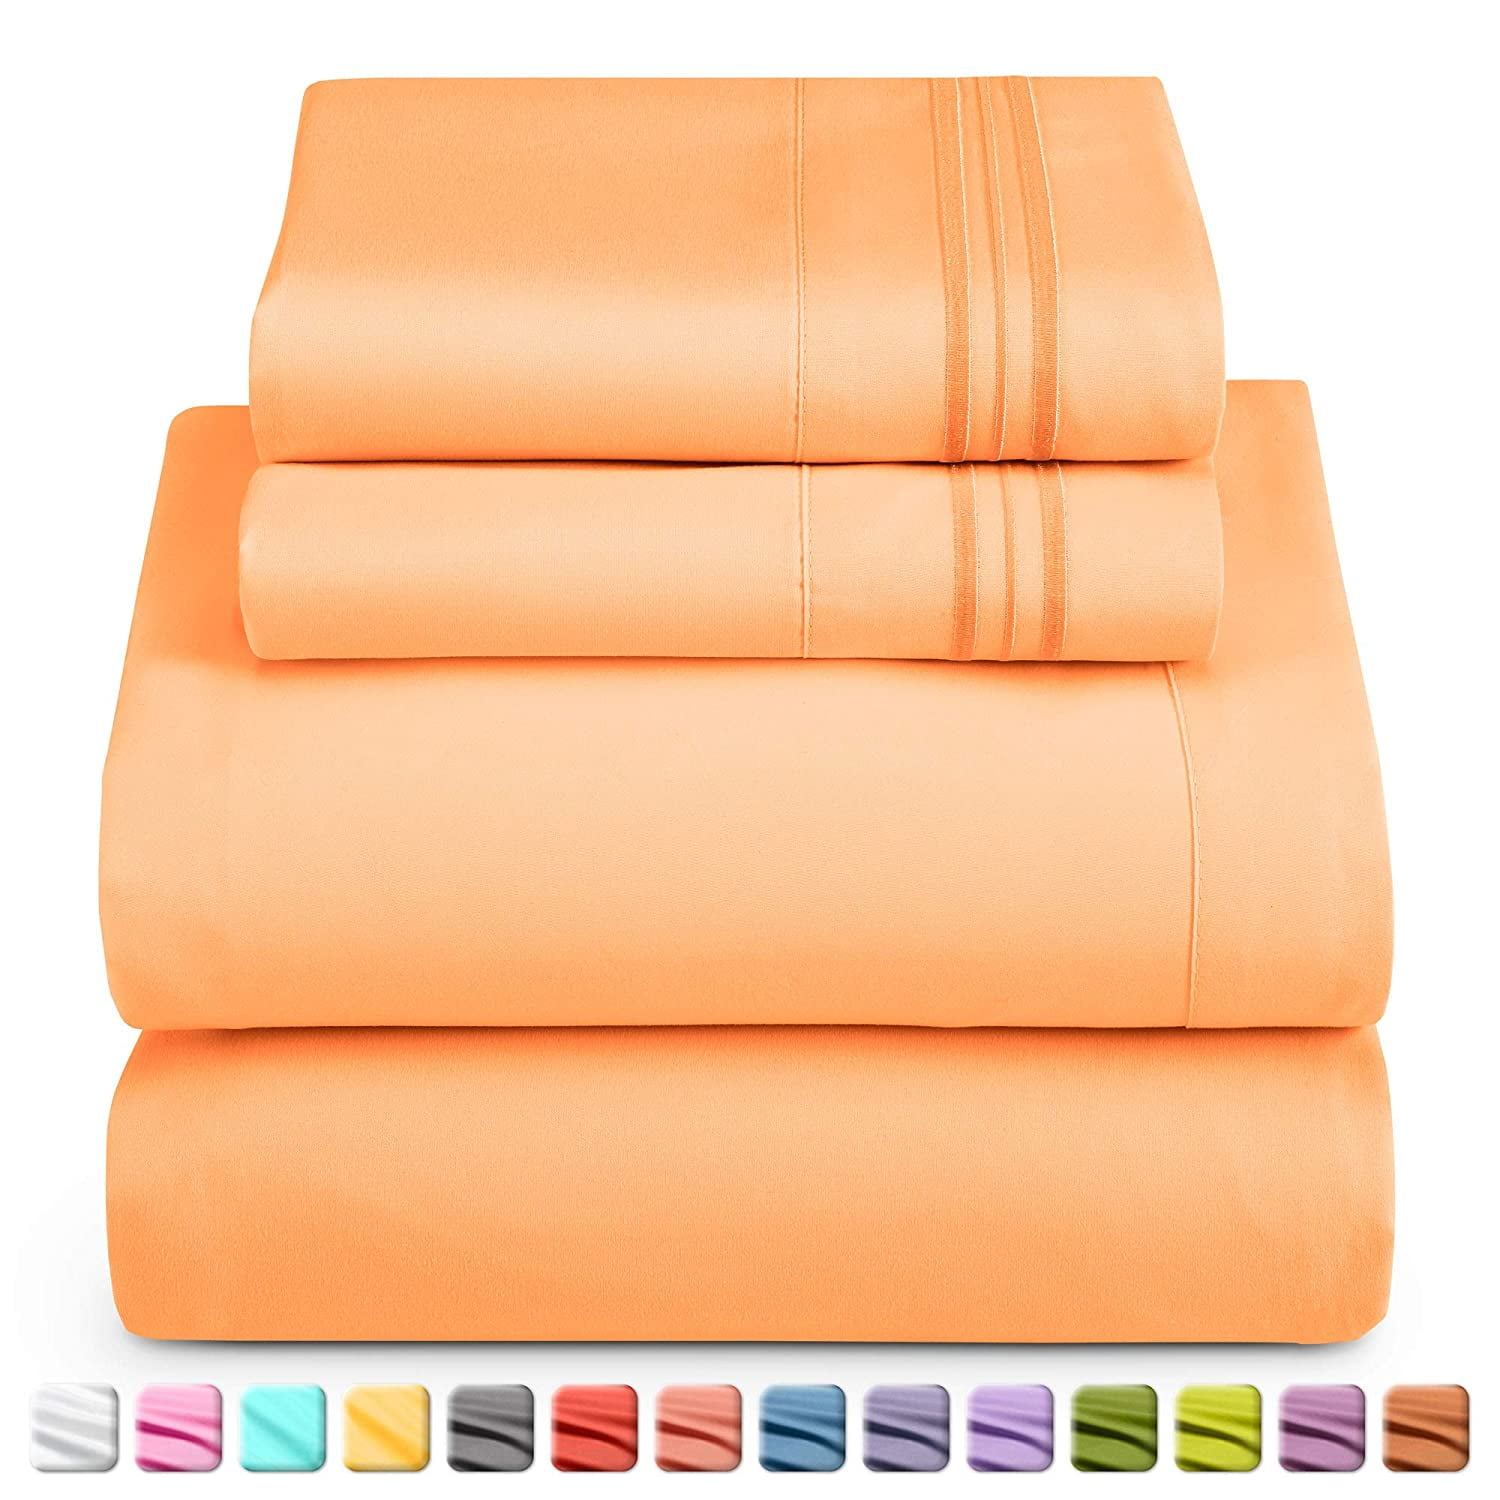 Queen Size Bed Sheets Set by Nestl - Deep Pocket 4 Piece Bed Sheet Set - 1800 Hotel Luxury Soft Double Brushed Microfiber - Wrinkle, Fade, Stain Resistant - Hypoallergenic, Apricot Orange